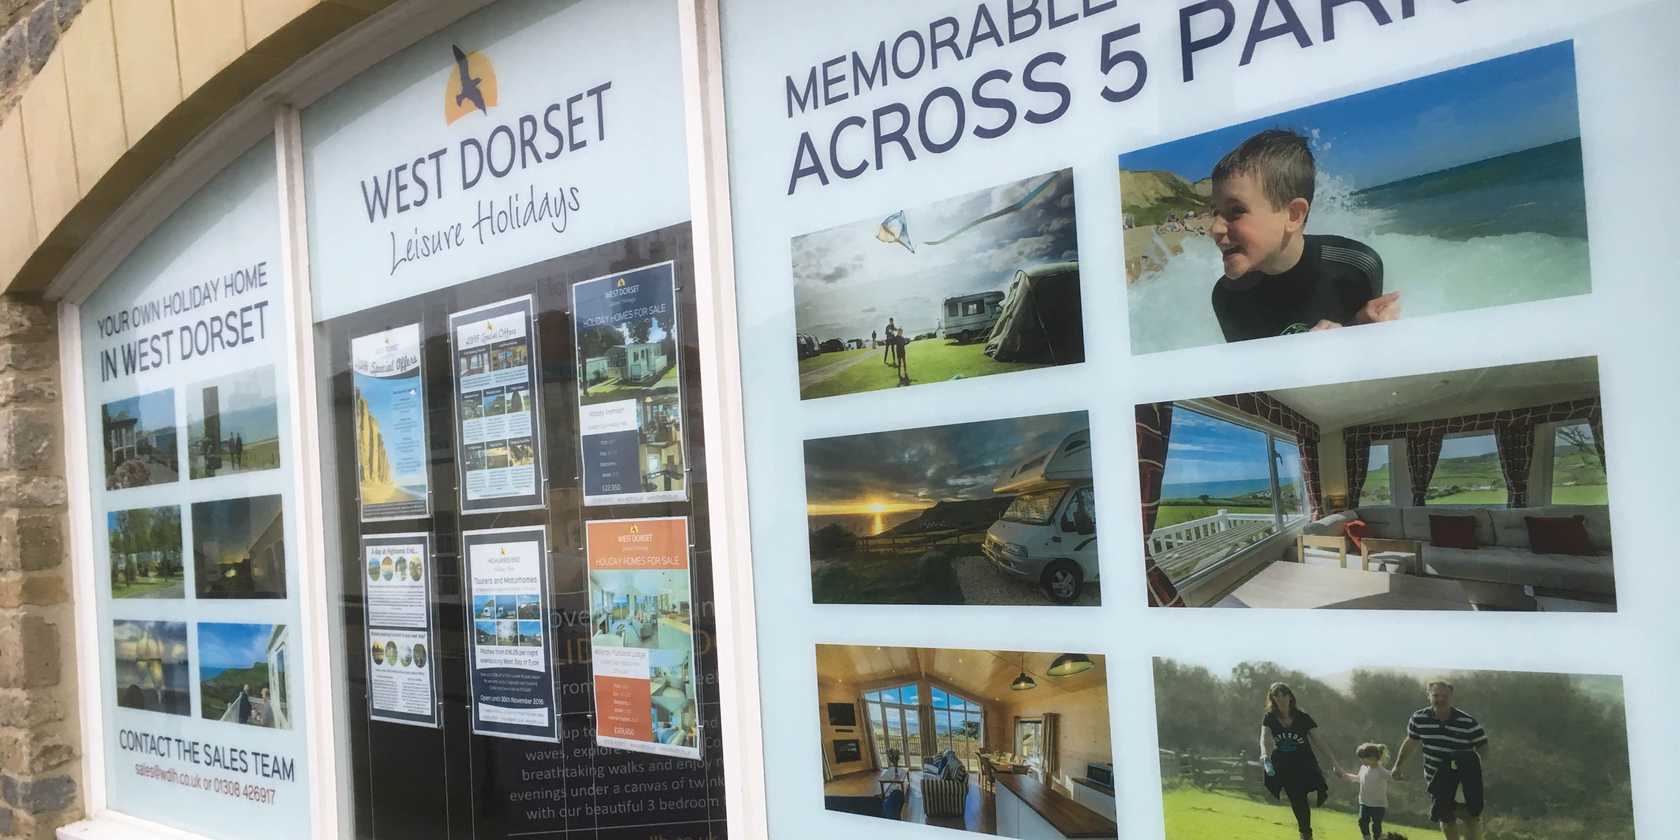 Window Graphics for West Dorset Leisure Holidays